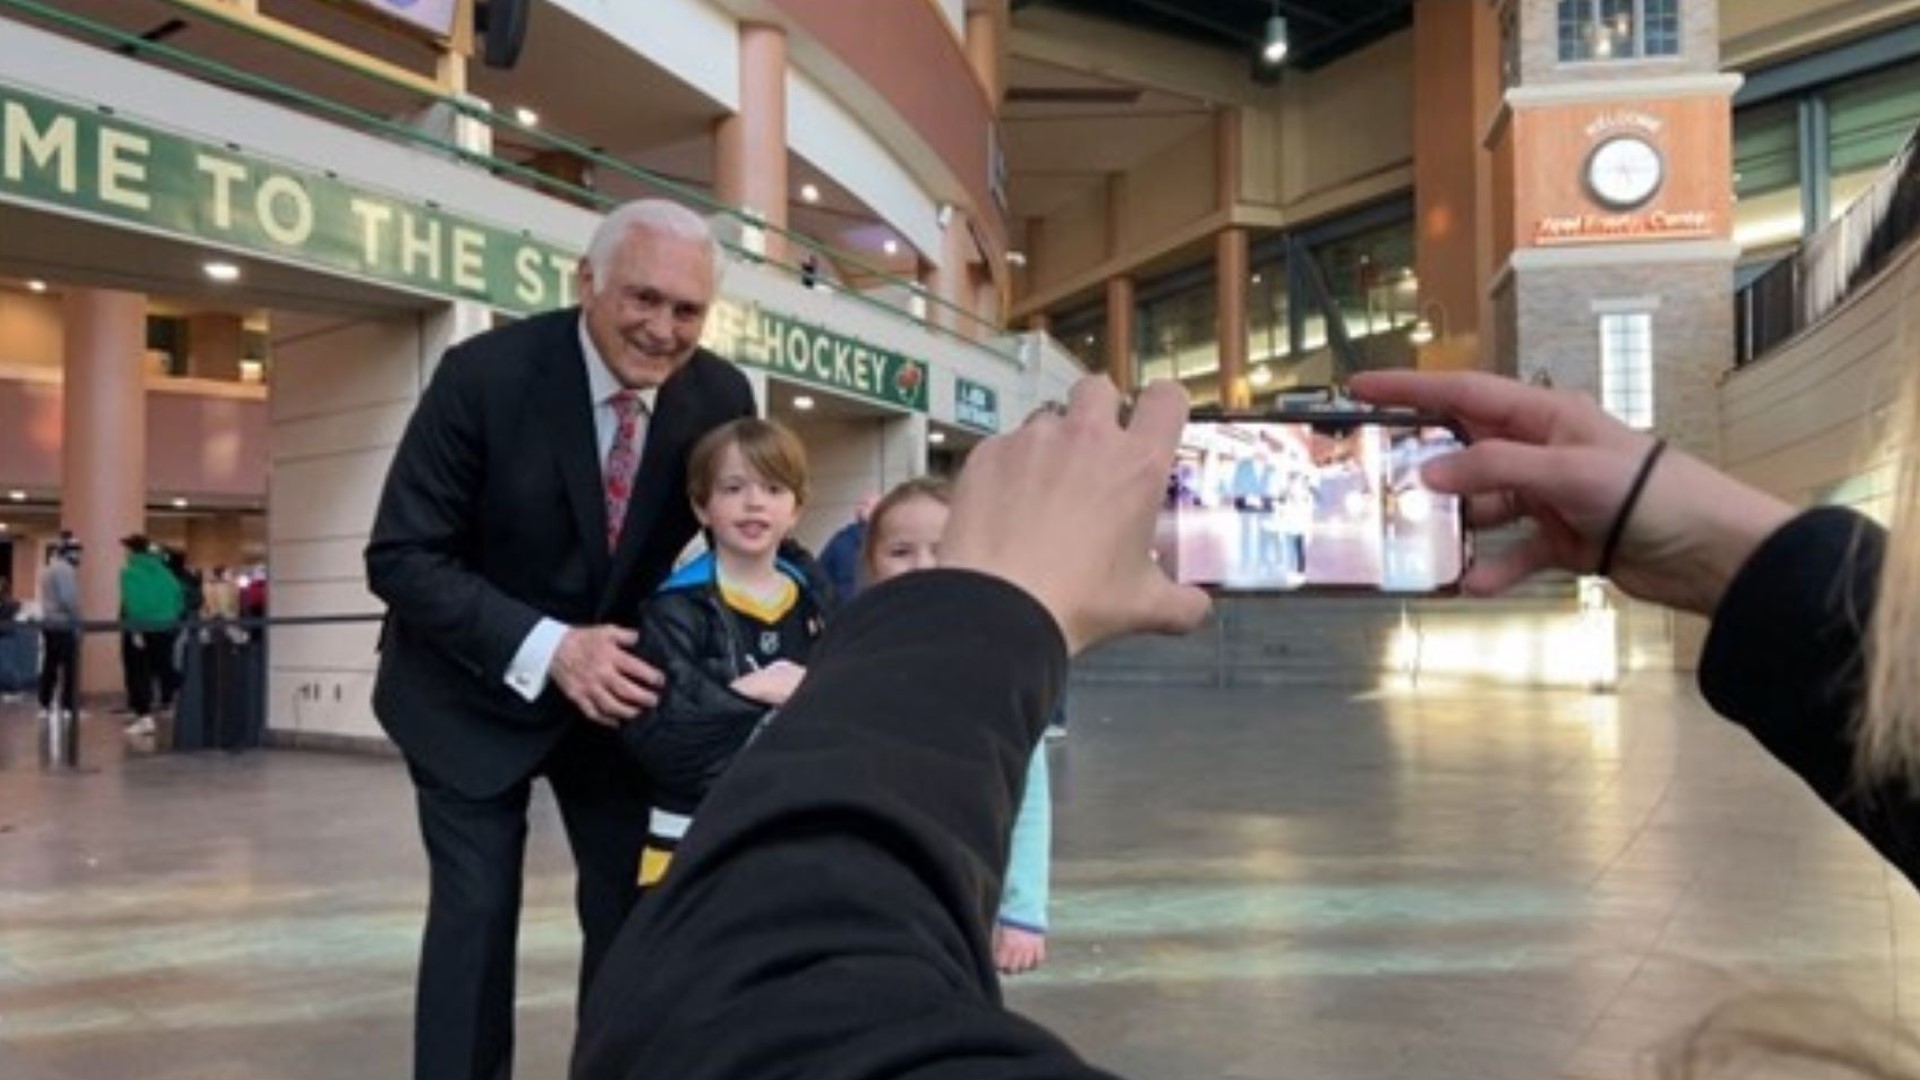 During Saturday night's championship, Lou Nanne was honored multiple times before and during the game.